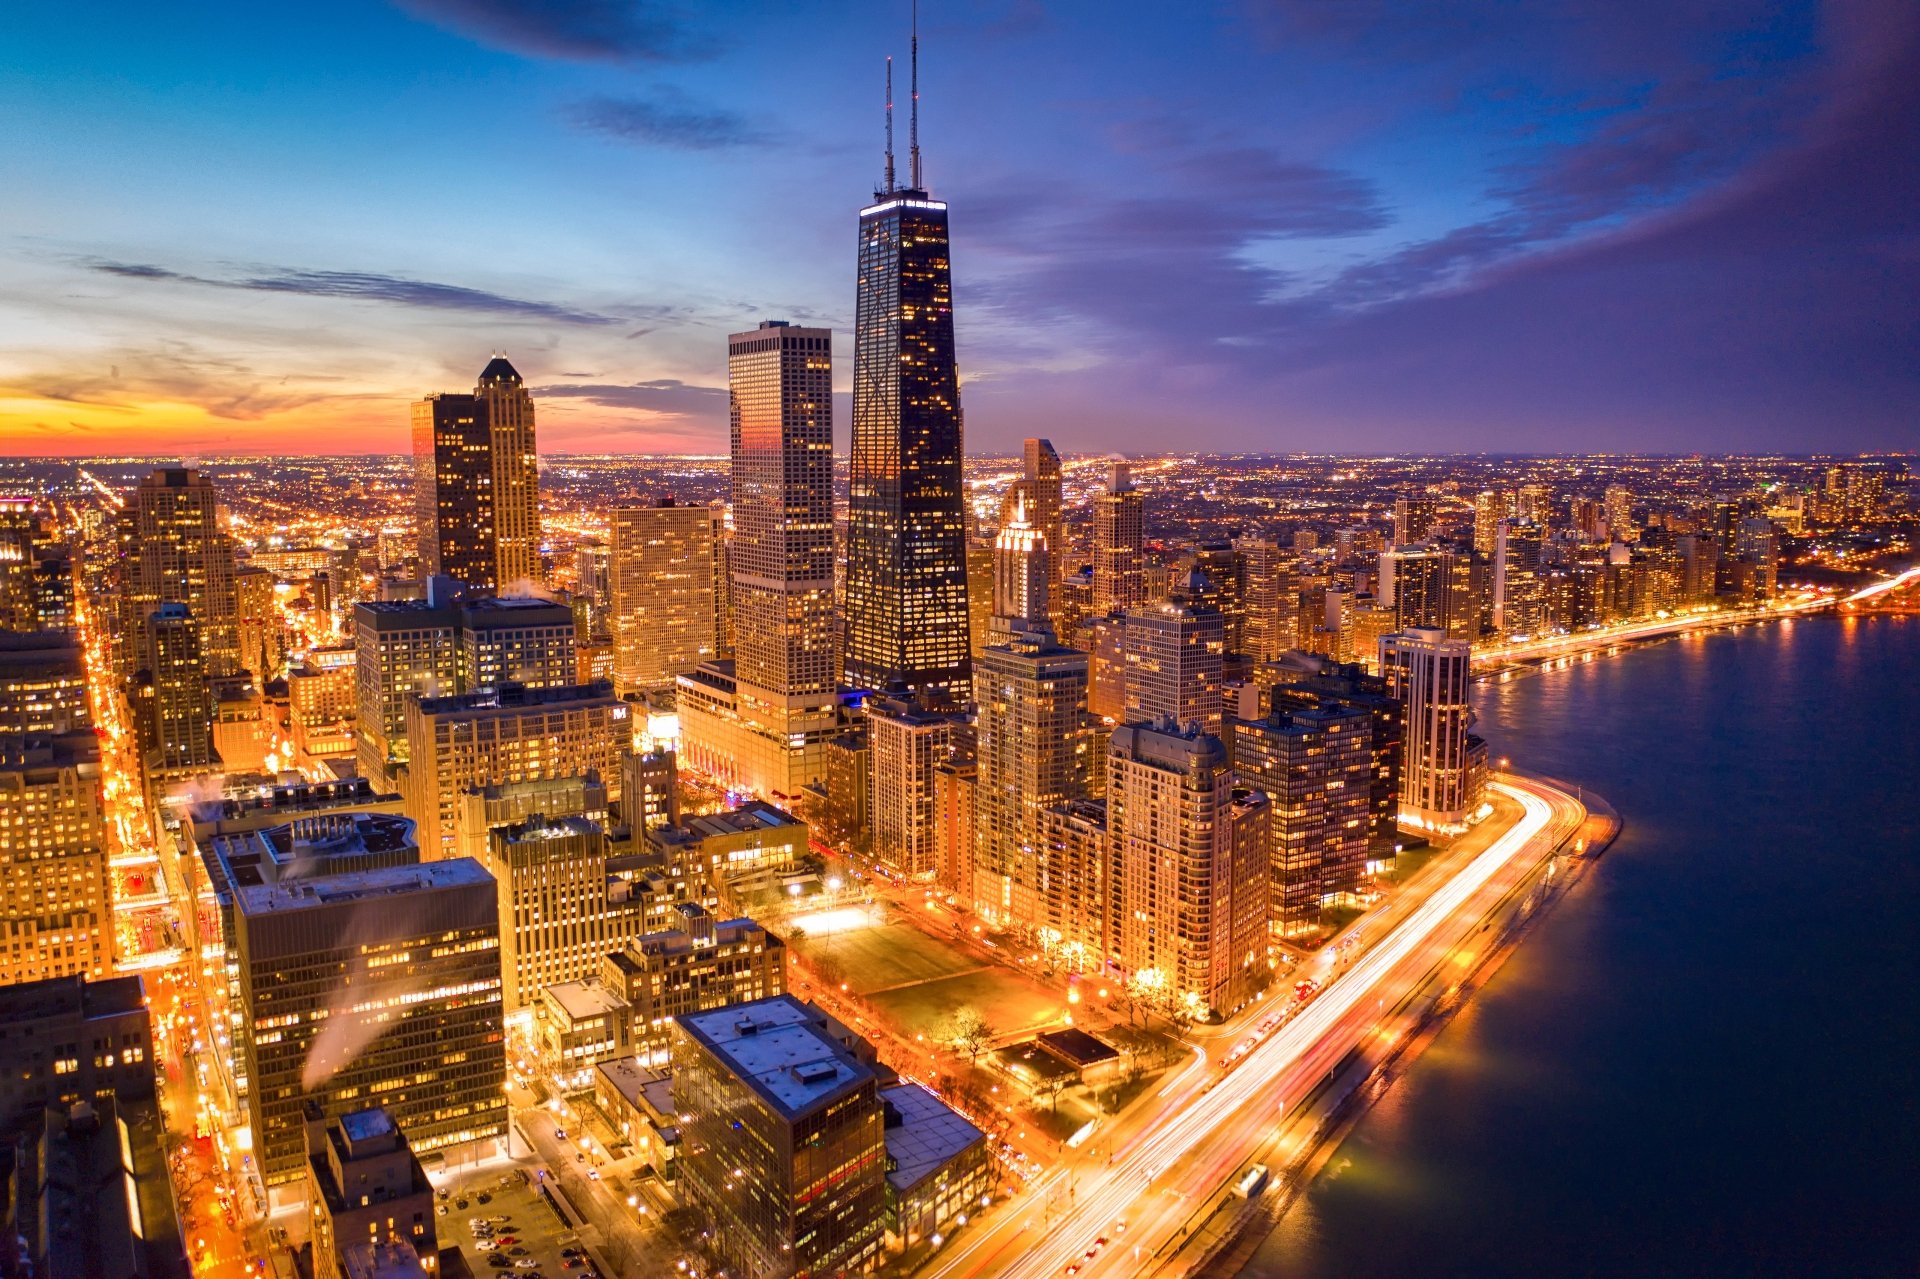 Chicago 4k Ultra HD Wallpaper Background Image 5120x3411.